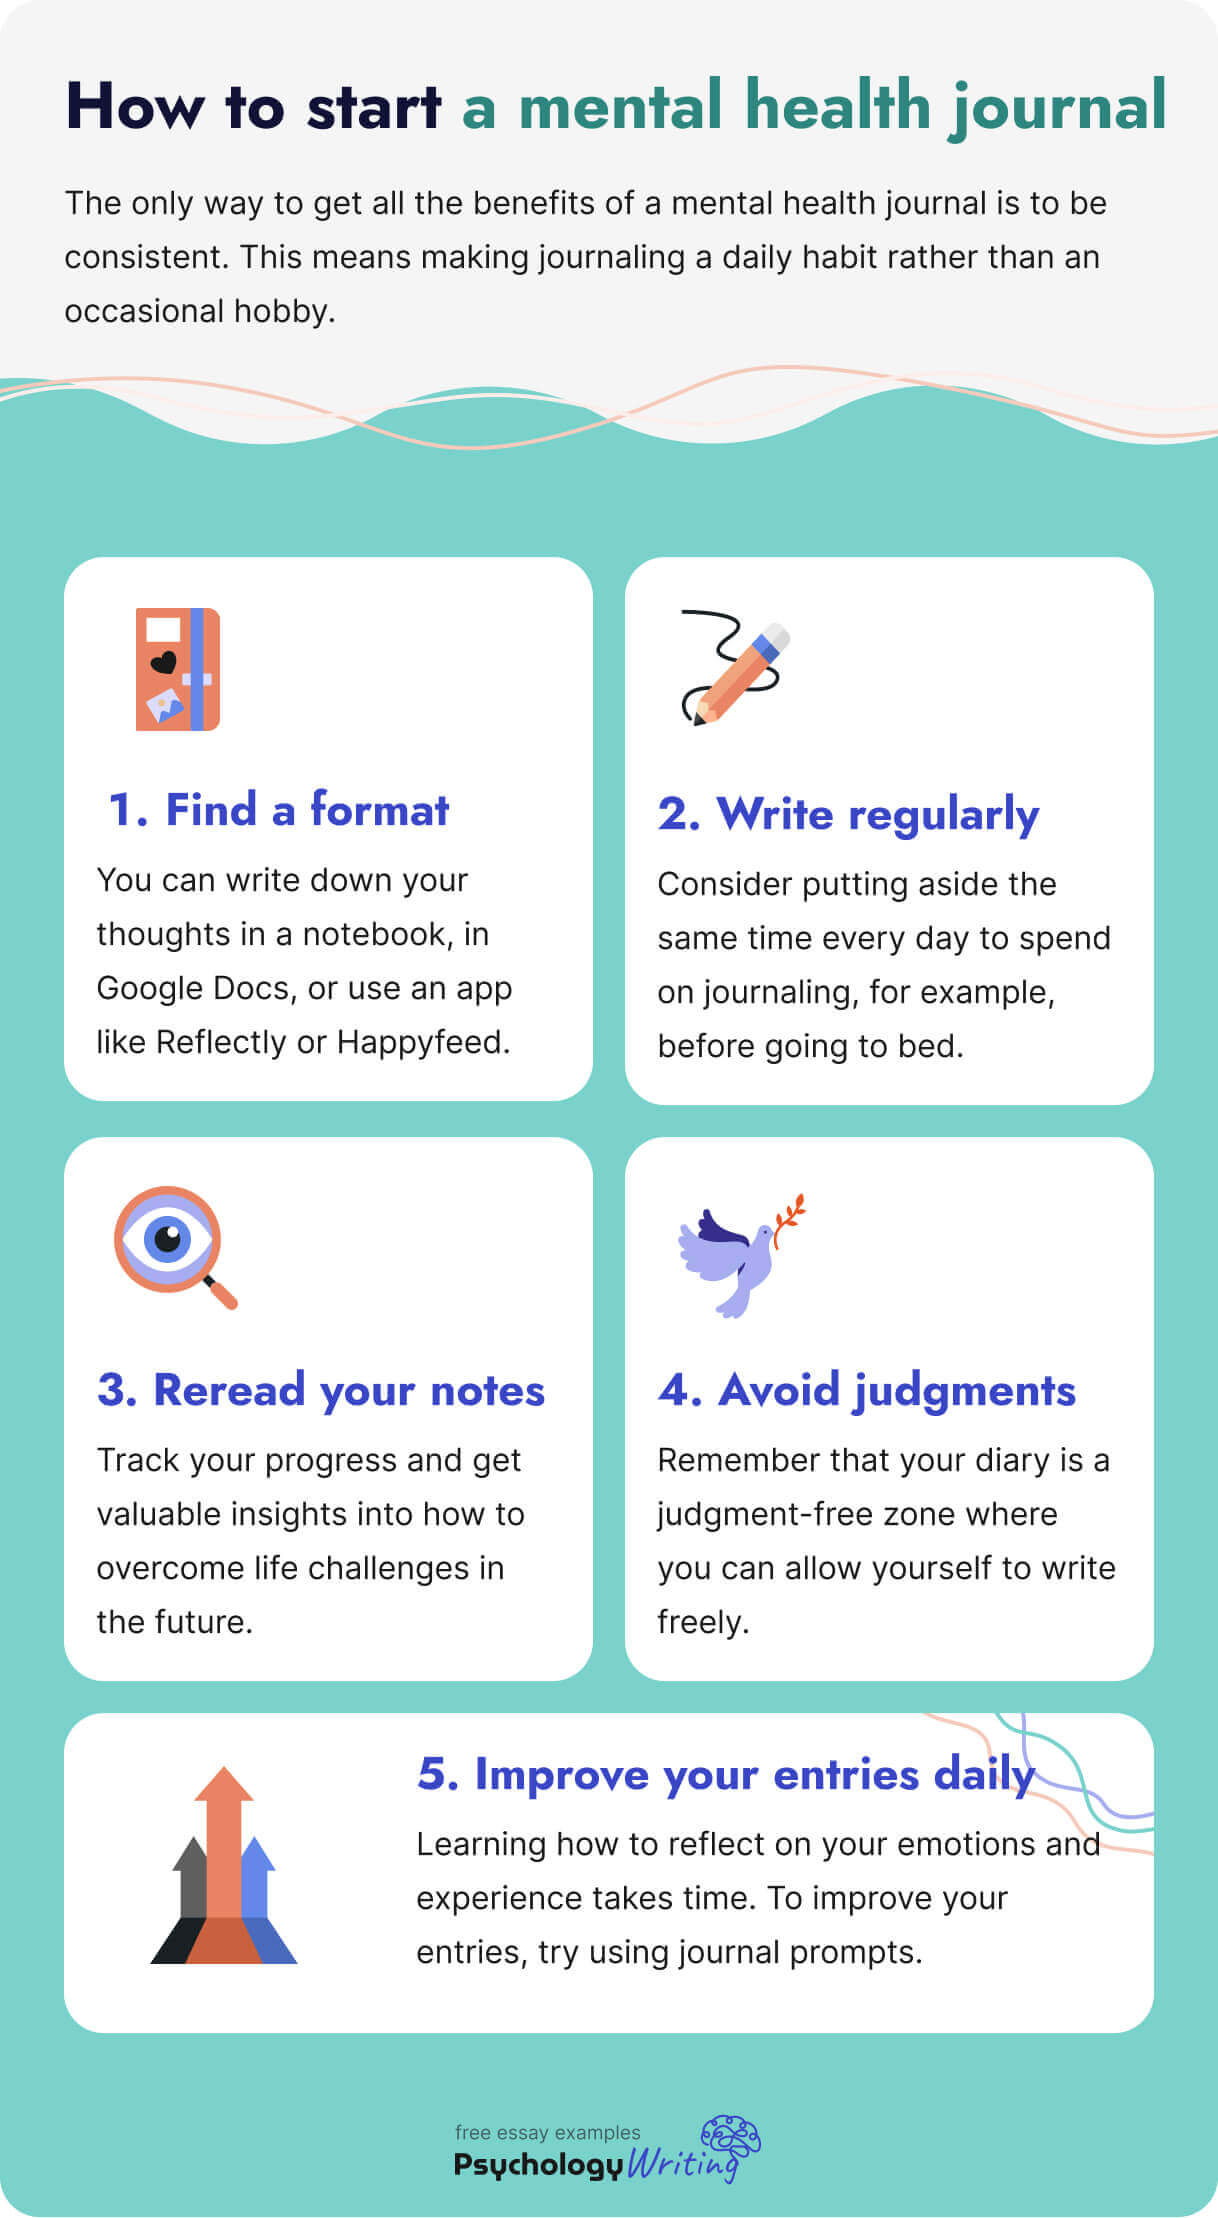 The picture lists the steps that will help you start your mental health journal.